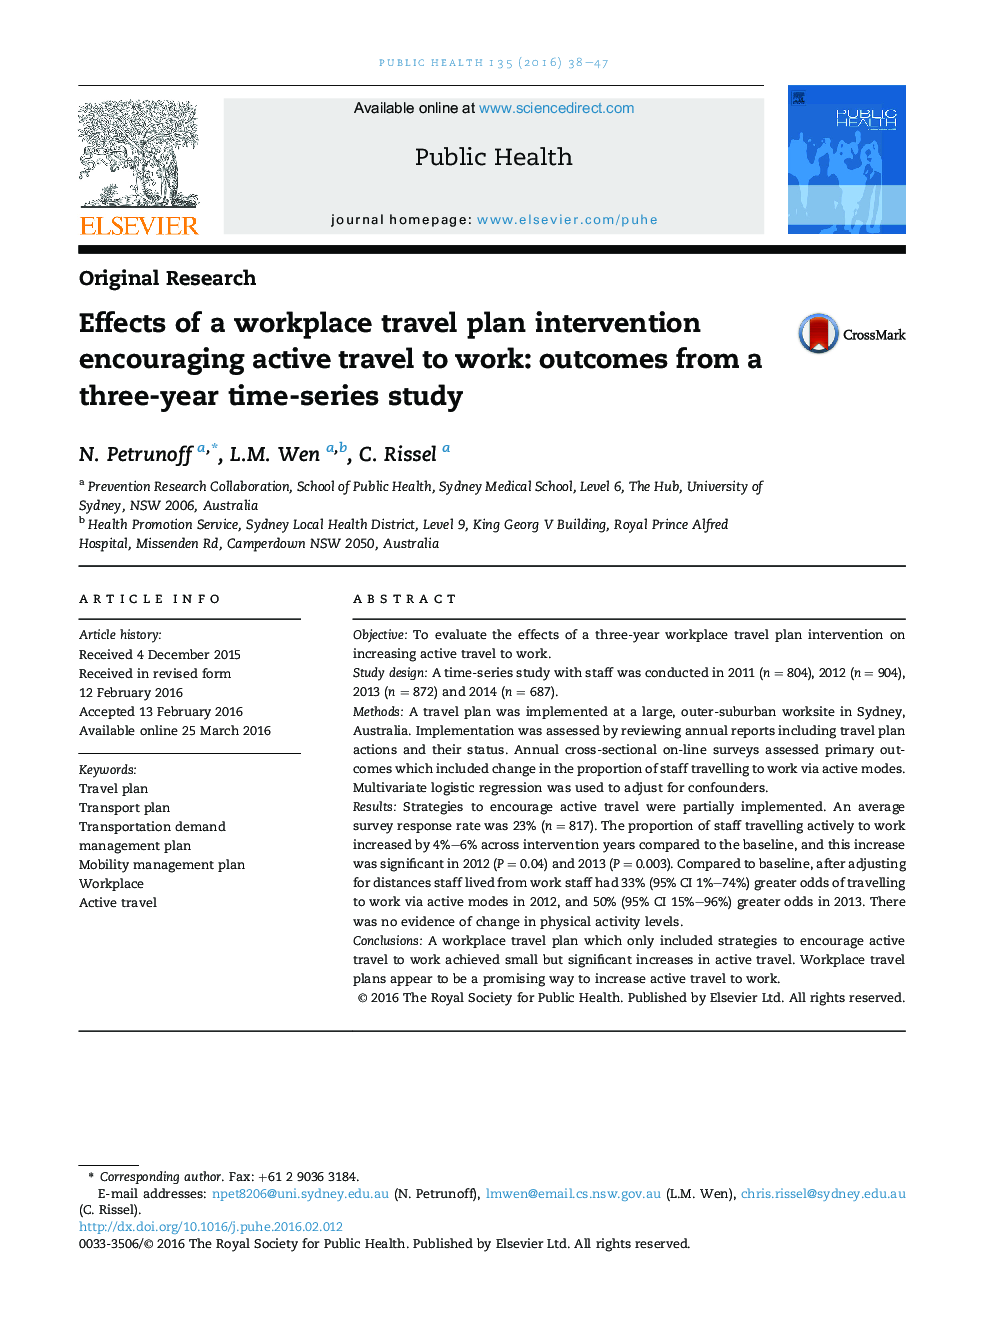 Effects of a workplace travel plan intervention encouraging active travel to work: outcomes from a three-year time-series study